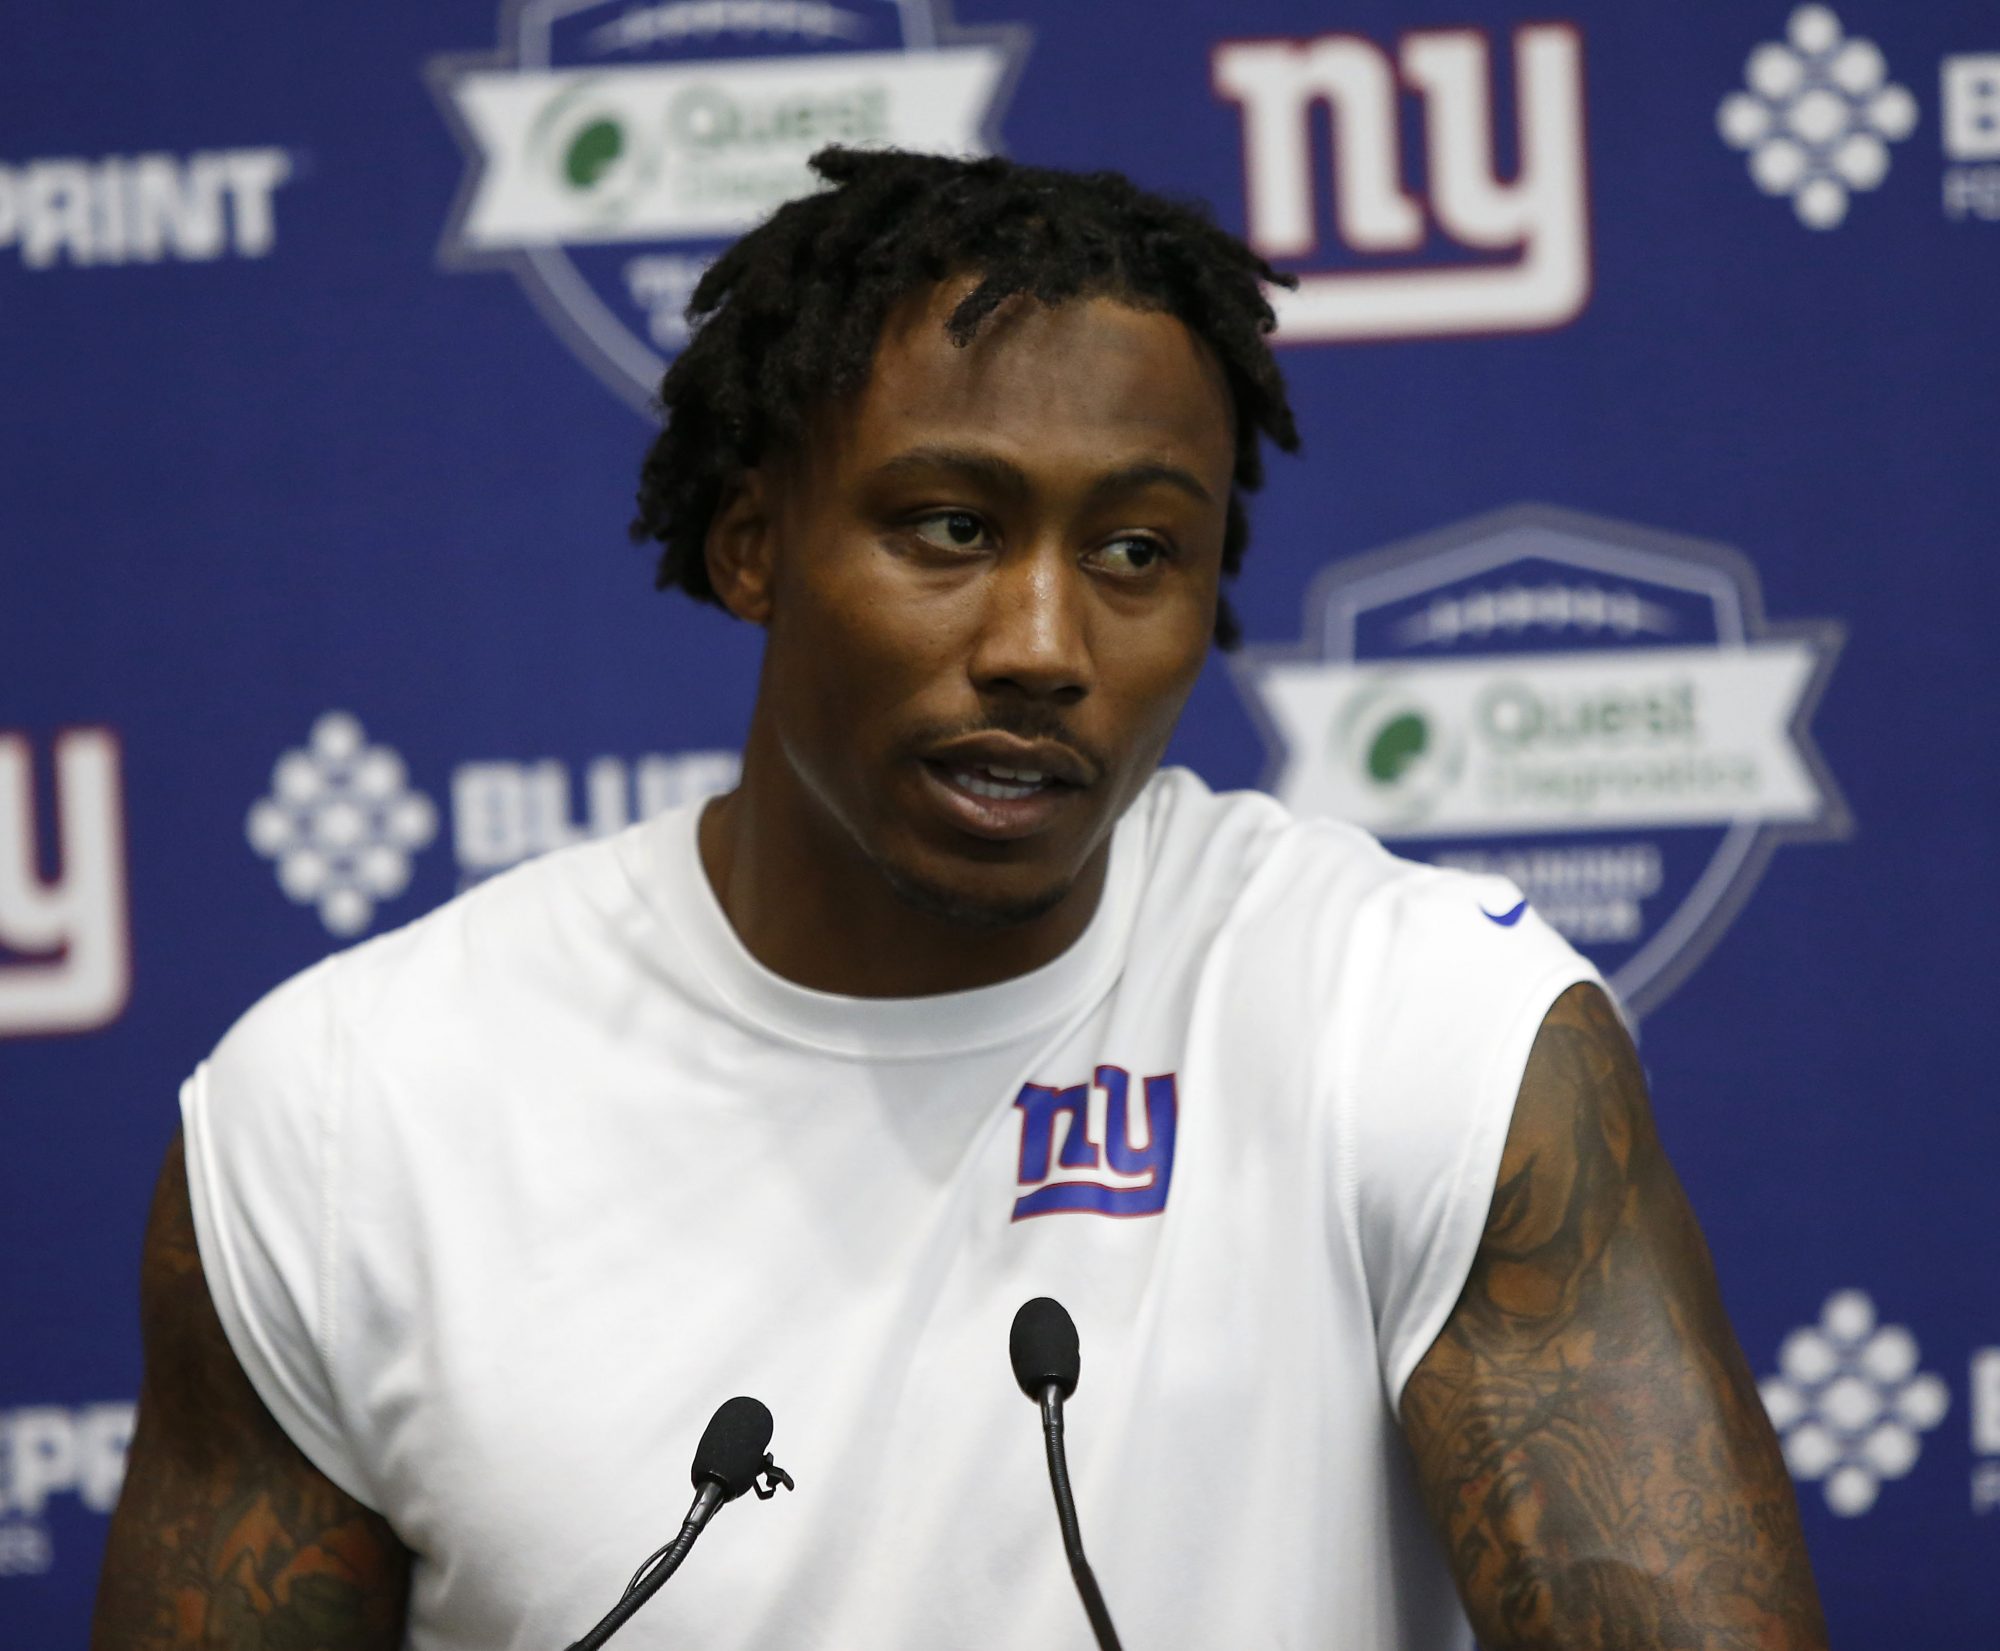 Brandon Marshall Walks Out Of Interview When Asked About Race 